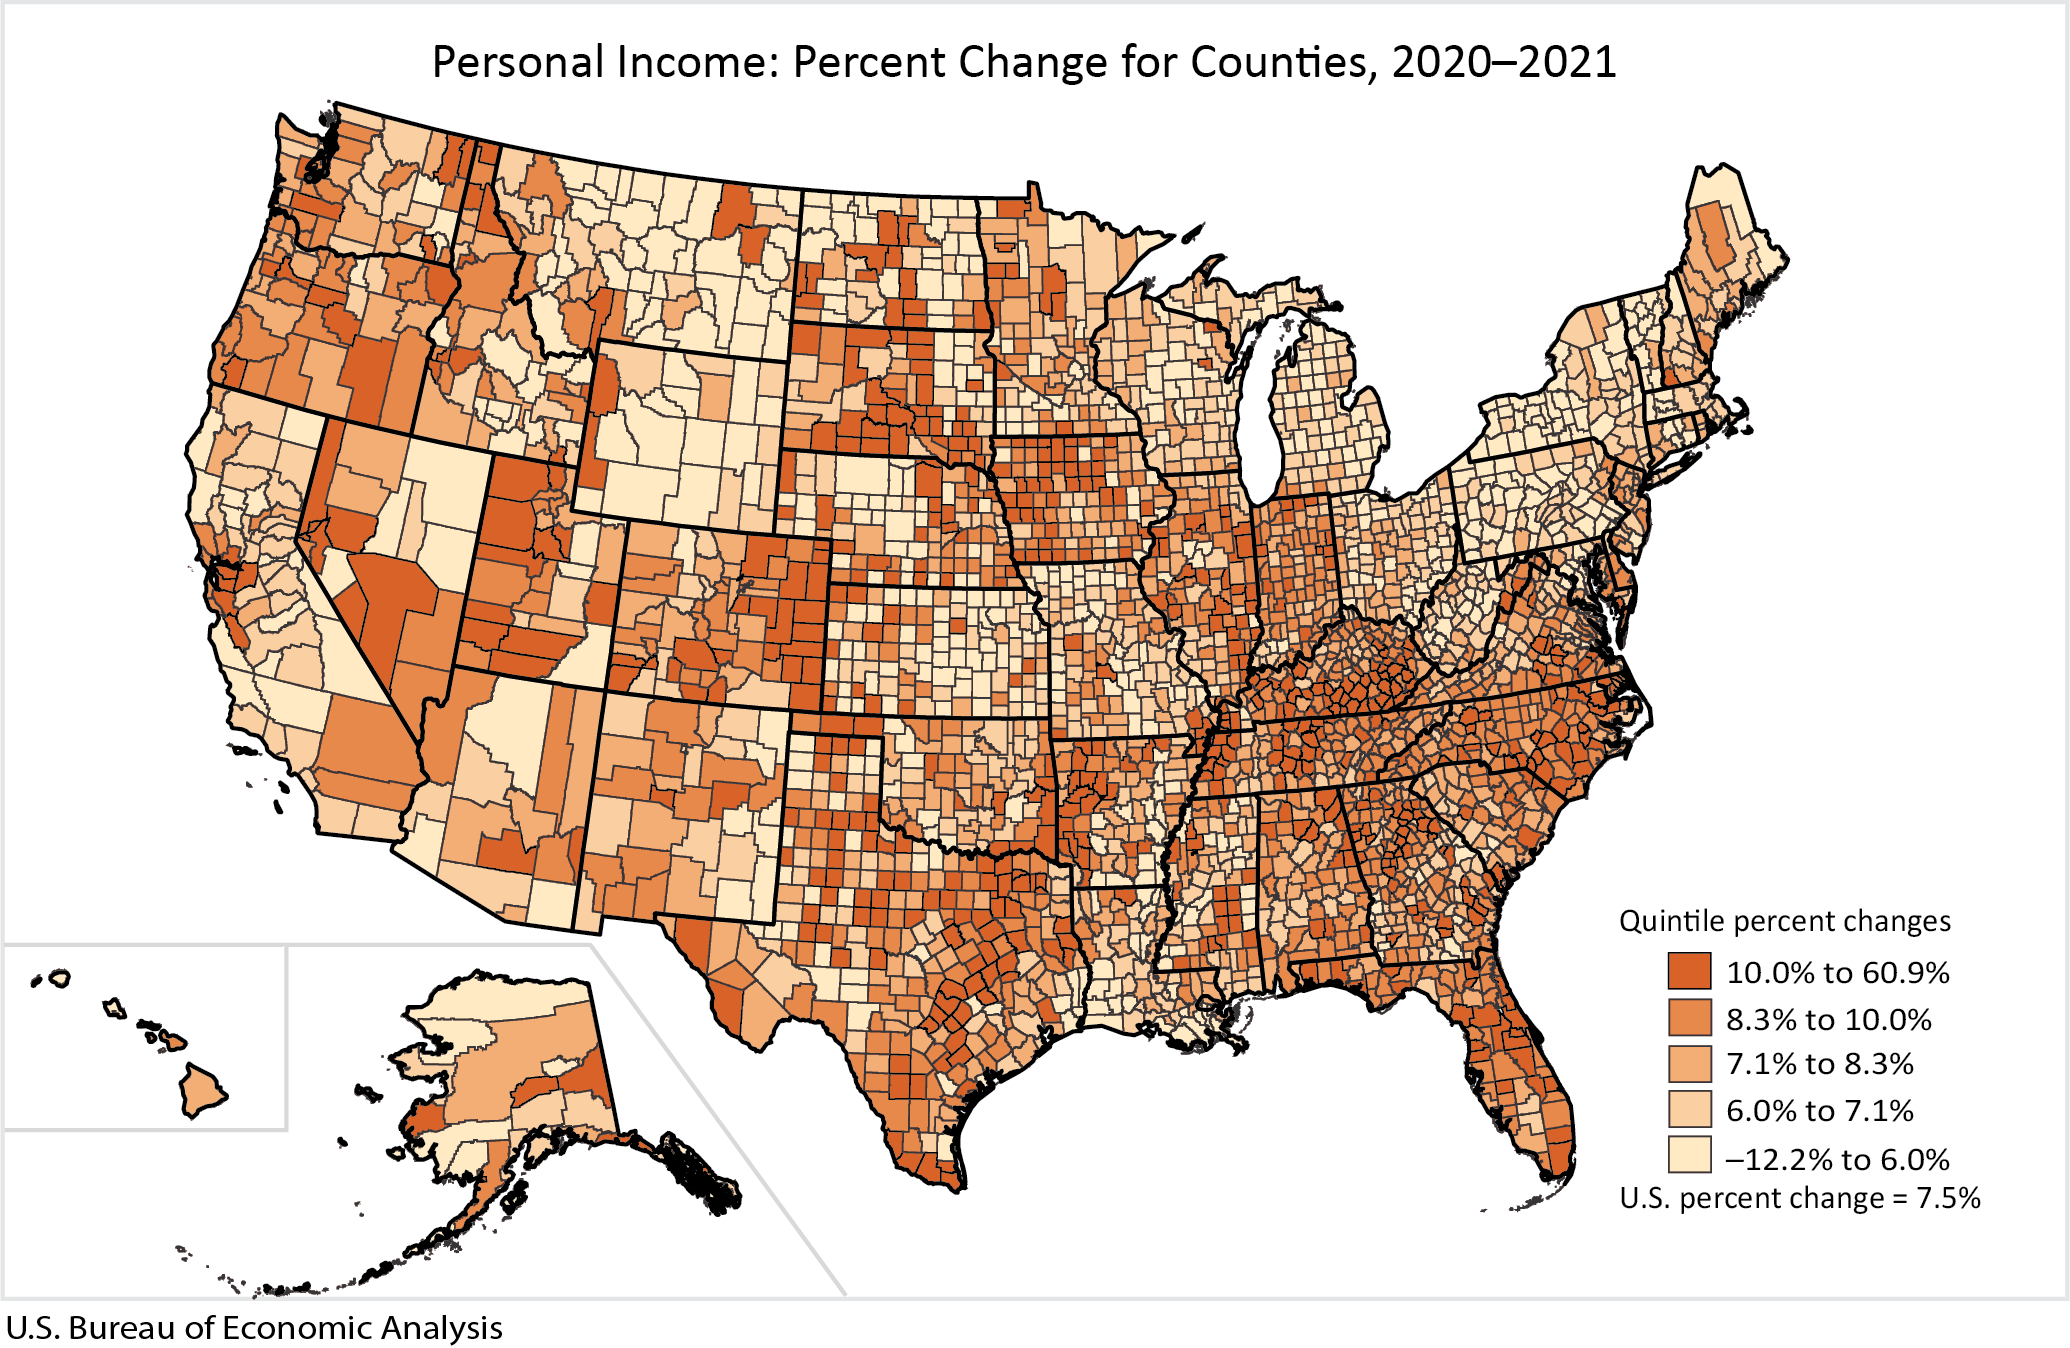 Map: Personal Income: Percent Change for Counties, 2020-2021